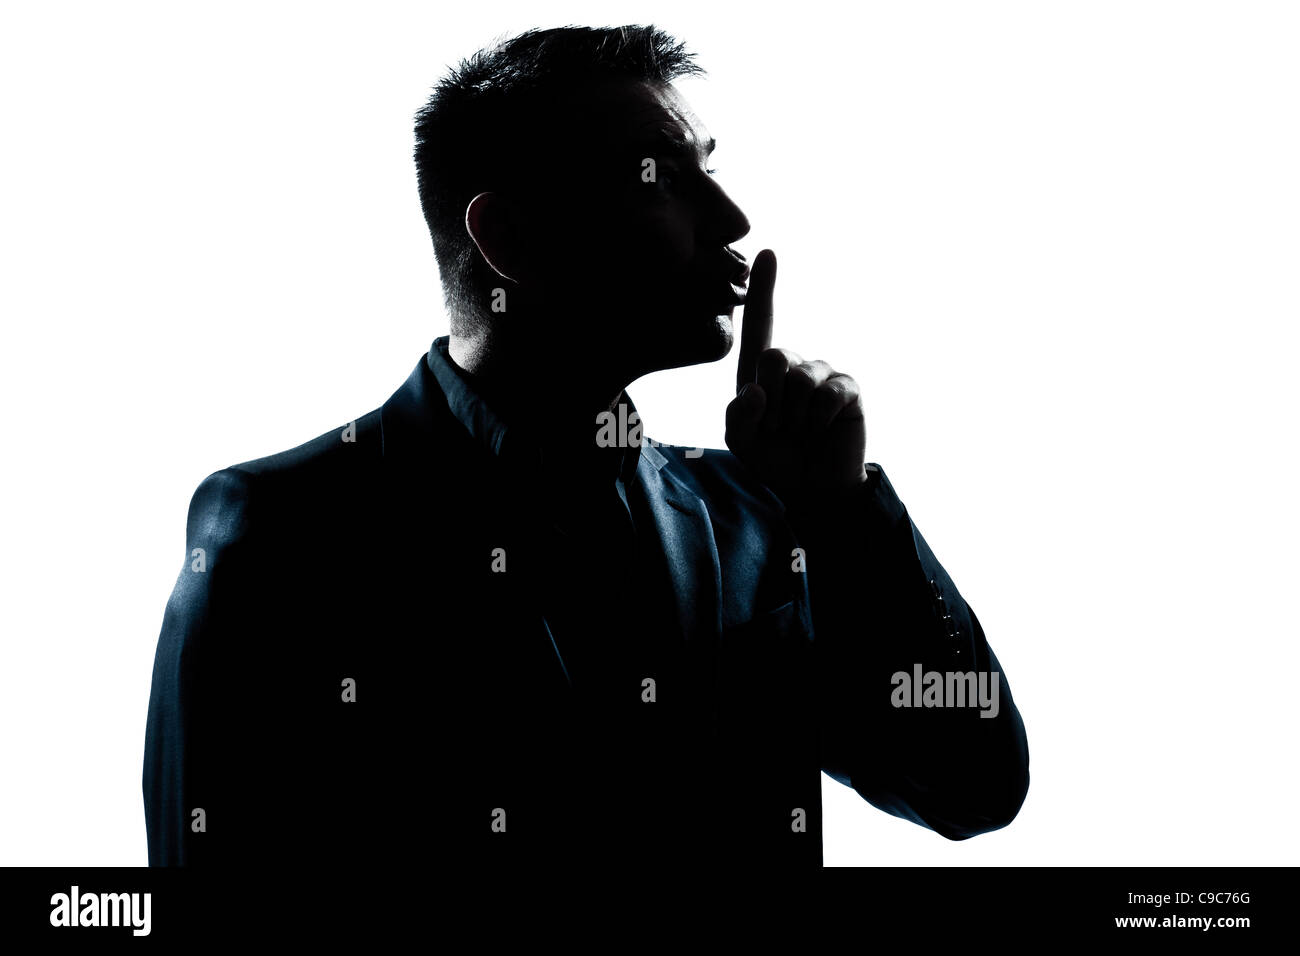 one  man hushing profile portrait silhouette in studio isolated white background Stock Photo